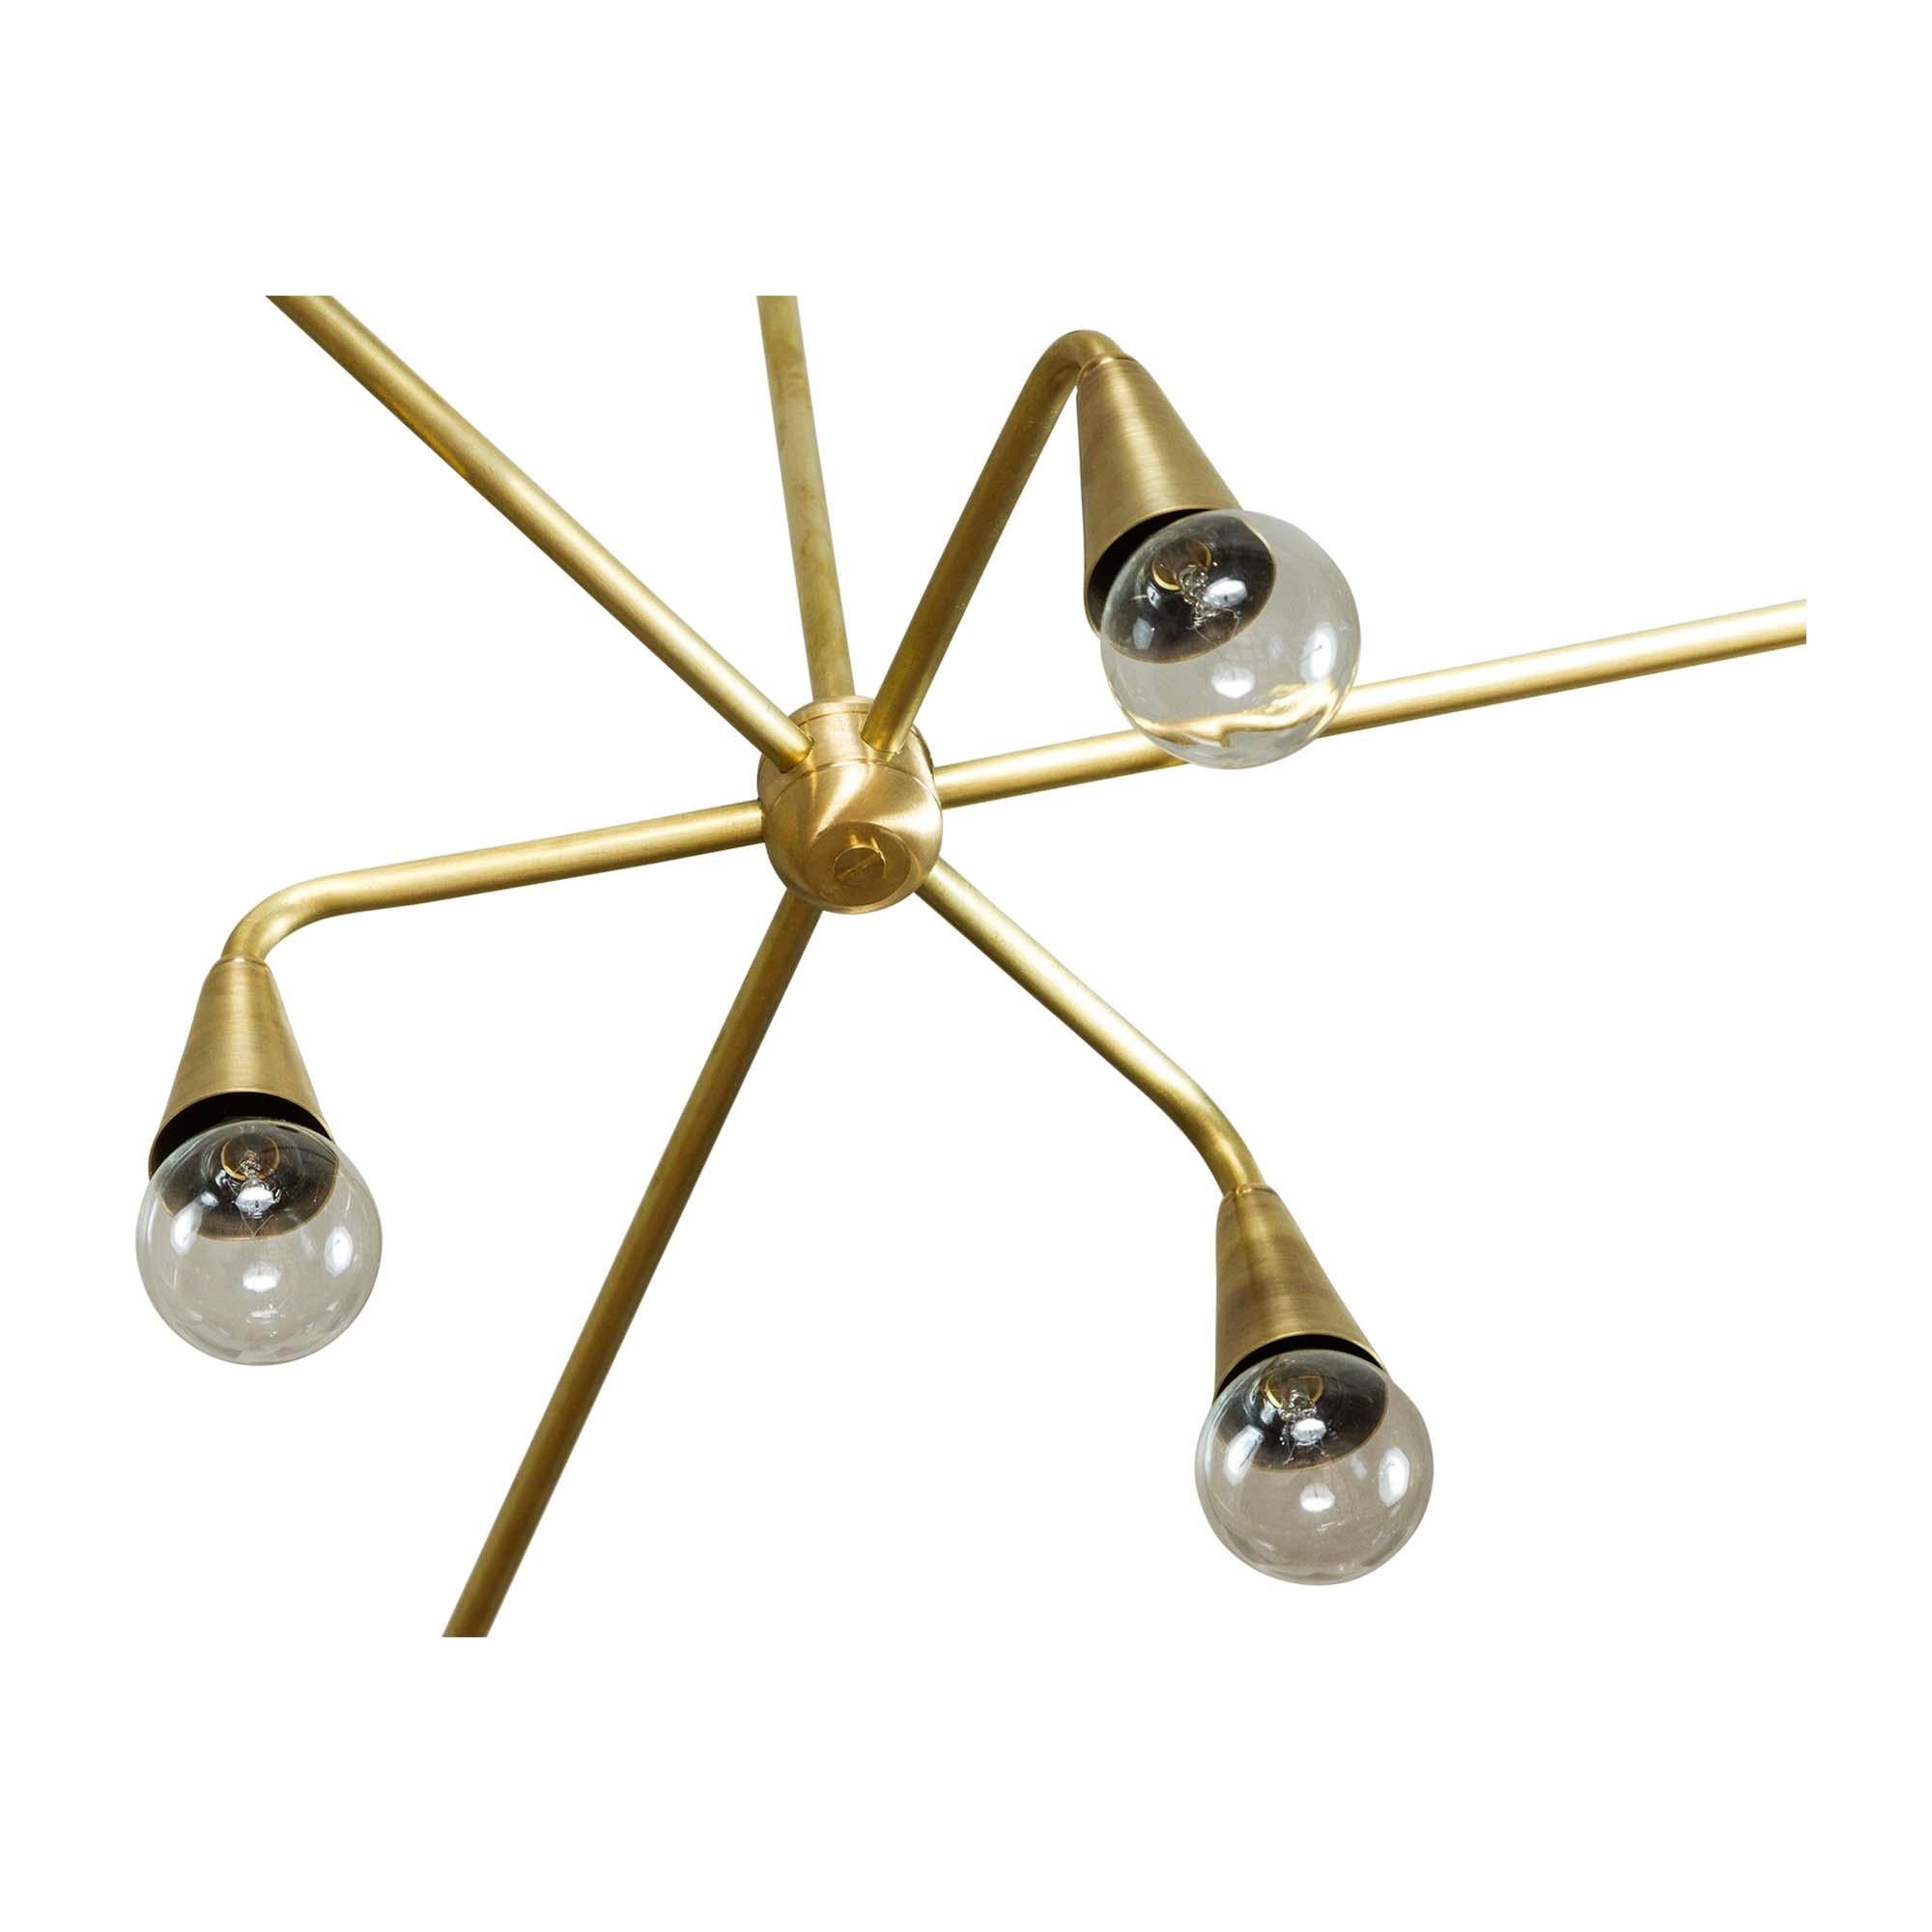 The 6-globe chandelier features six arms that are centered on a brass rod. Three of the globes are angled down with brass shades. The other three have white or black powdercoated shades.

The Lawson-Fenning Collection is designed and handmade in Los